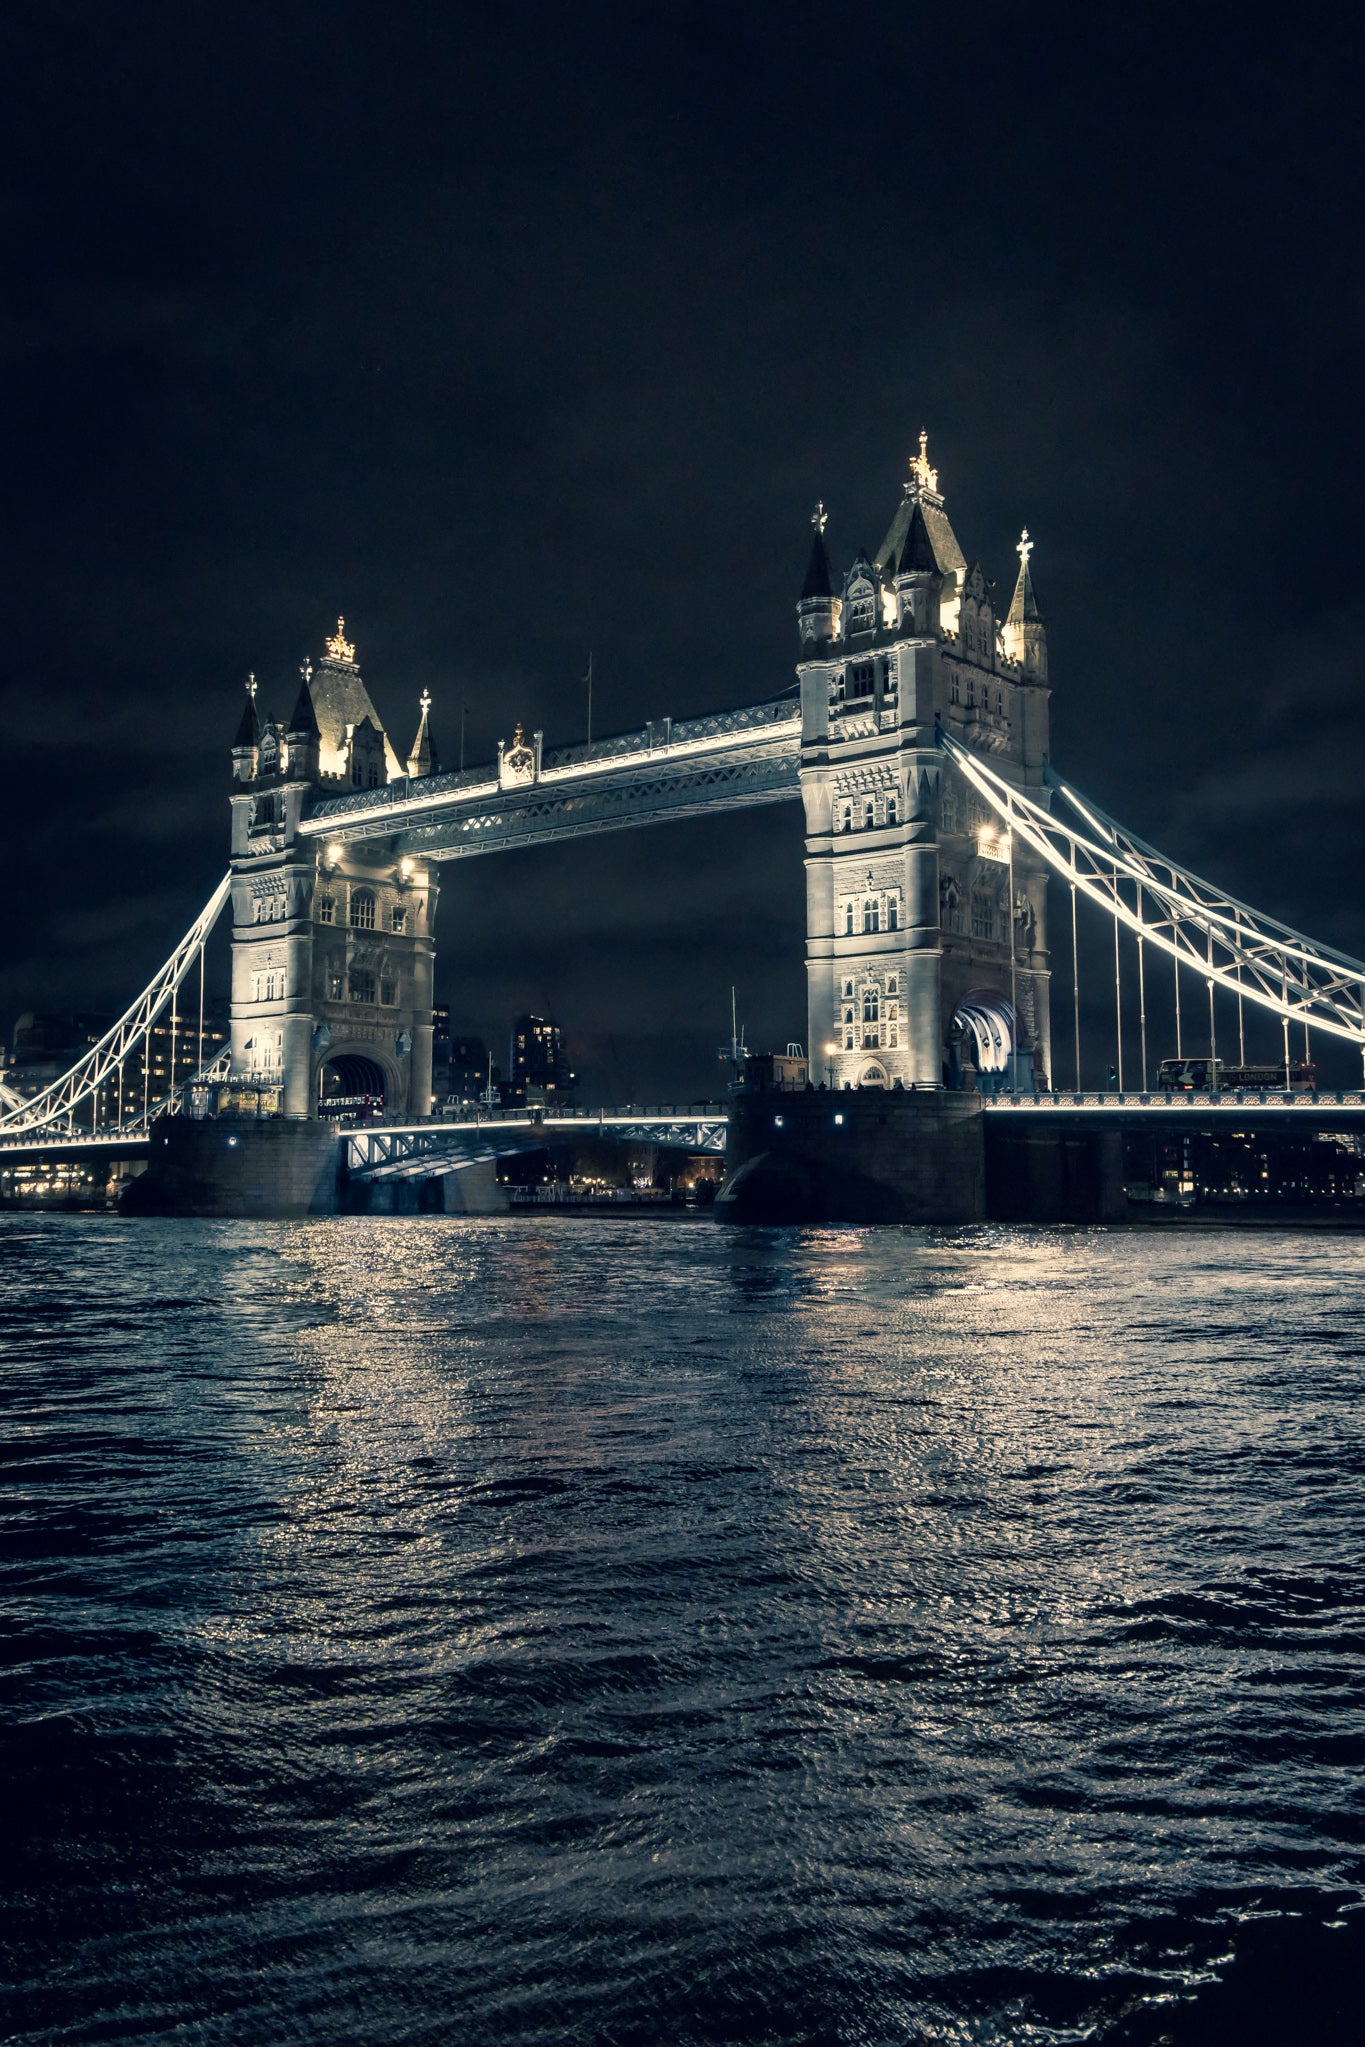 London Tower Bridge at night above the water